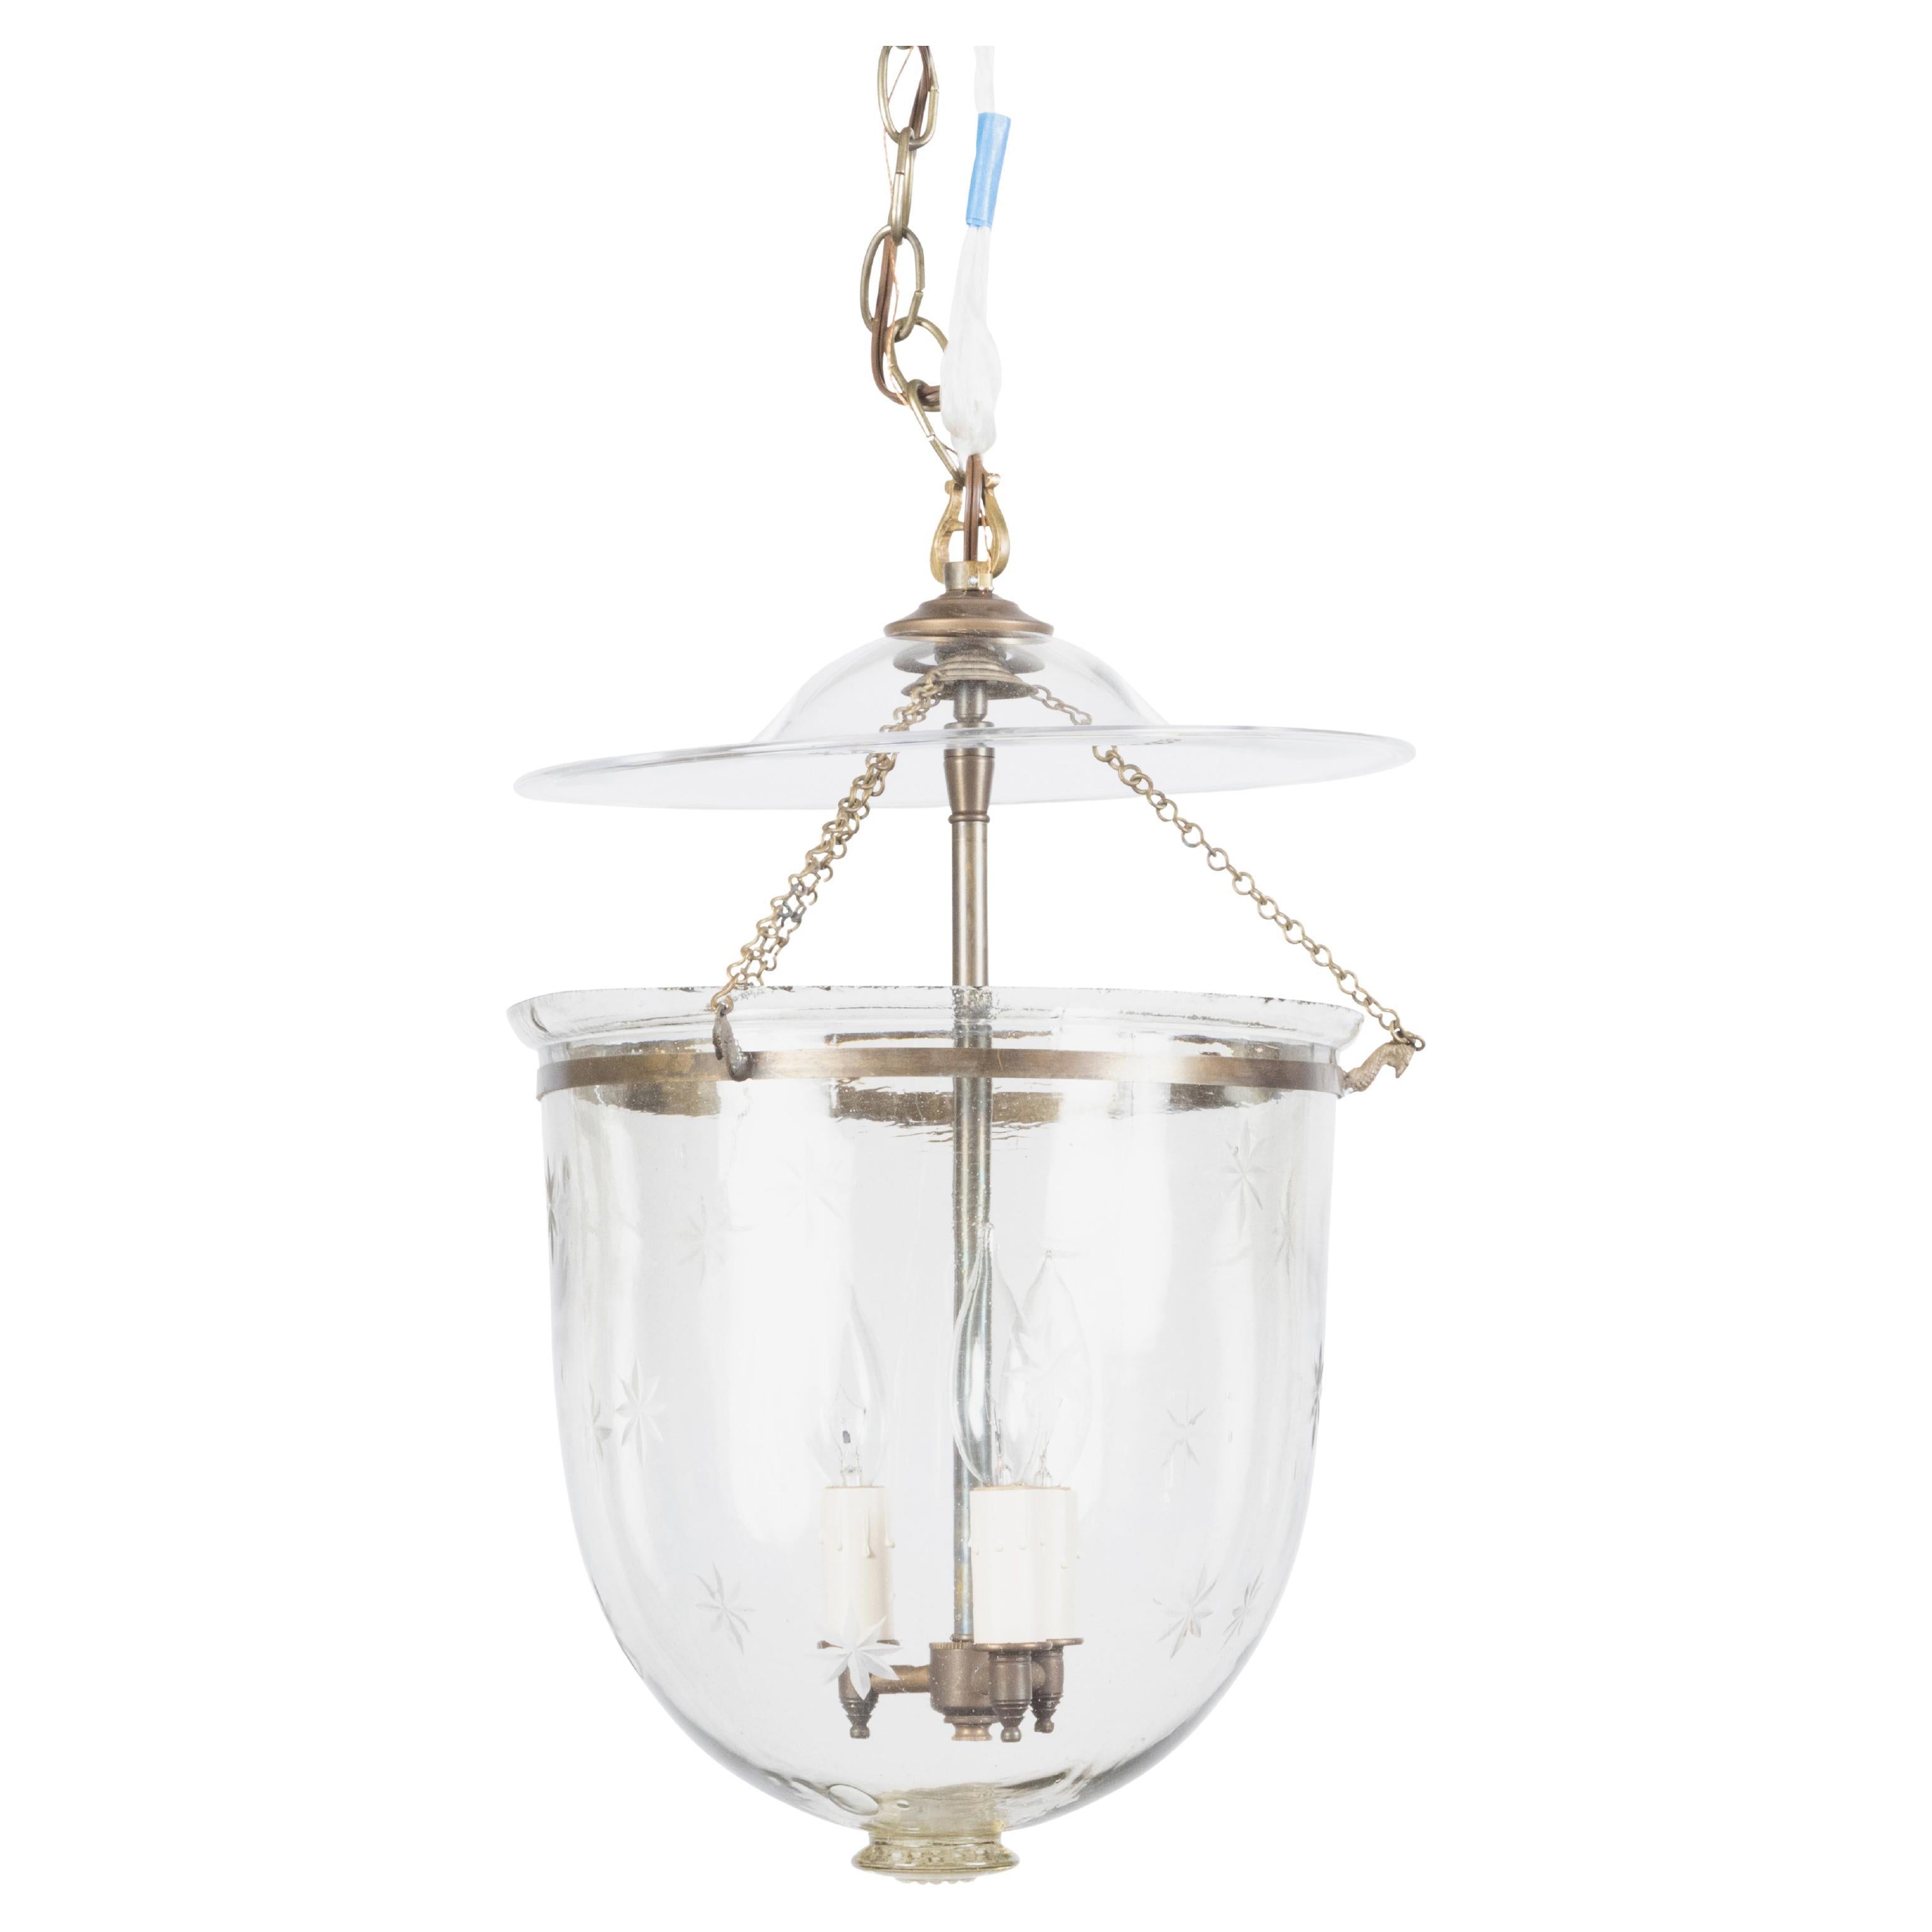 English 1900s Turn of the Century Bell Jar Light Fixture with Etched Stars For Sale